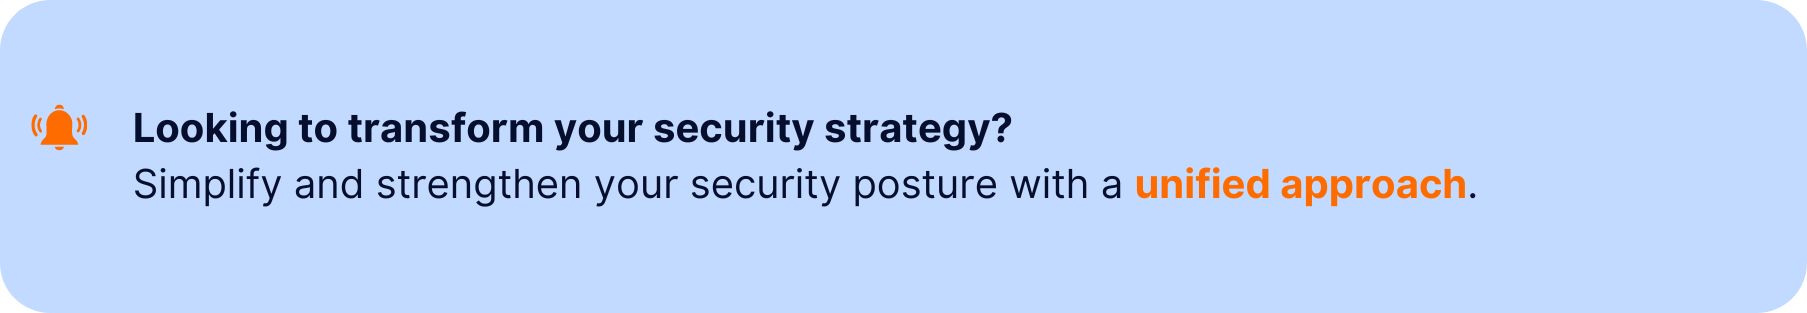 A banner with a notification icon and the text: "Looking to transform your security strategy? Simplify and strengthen your security posture with a unified approach." on a light blue background.